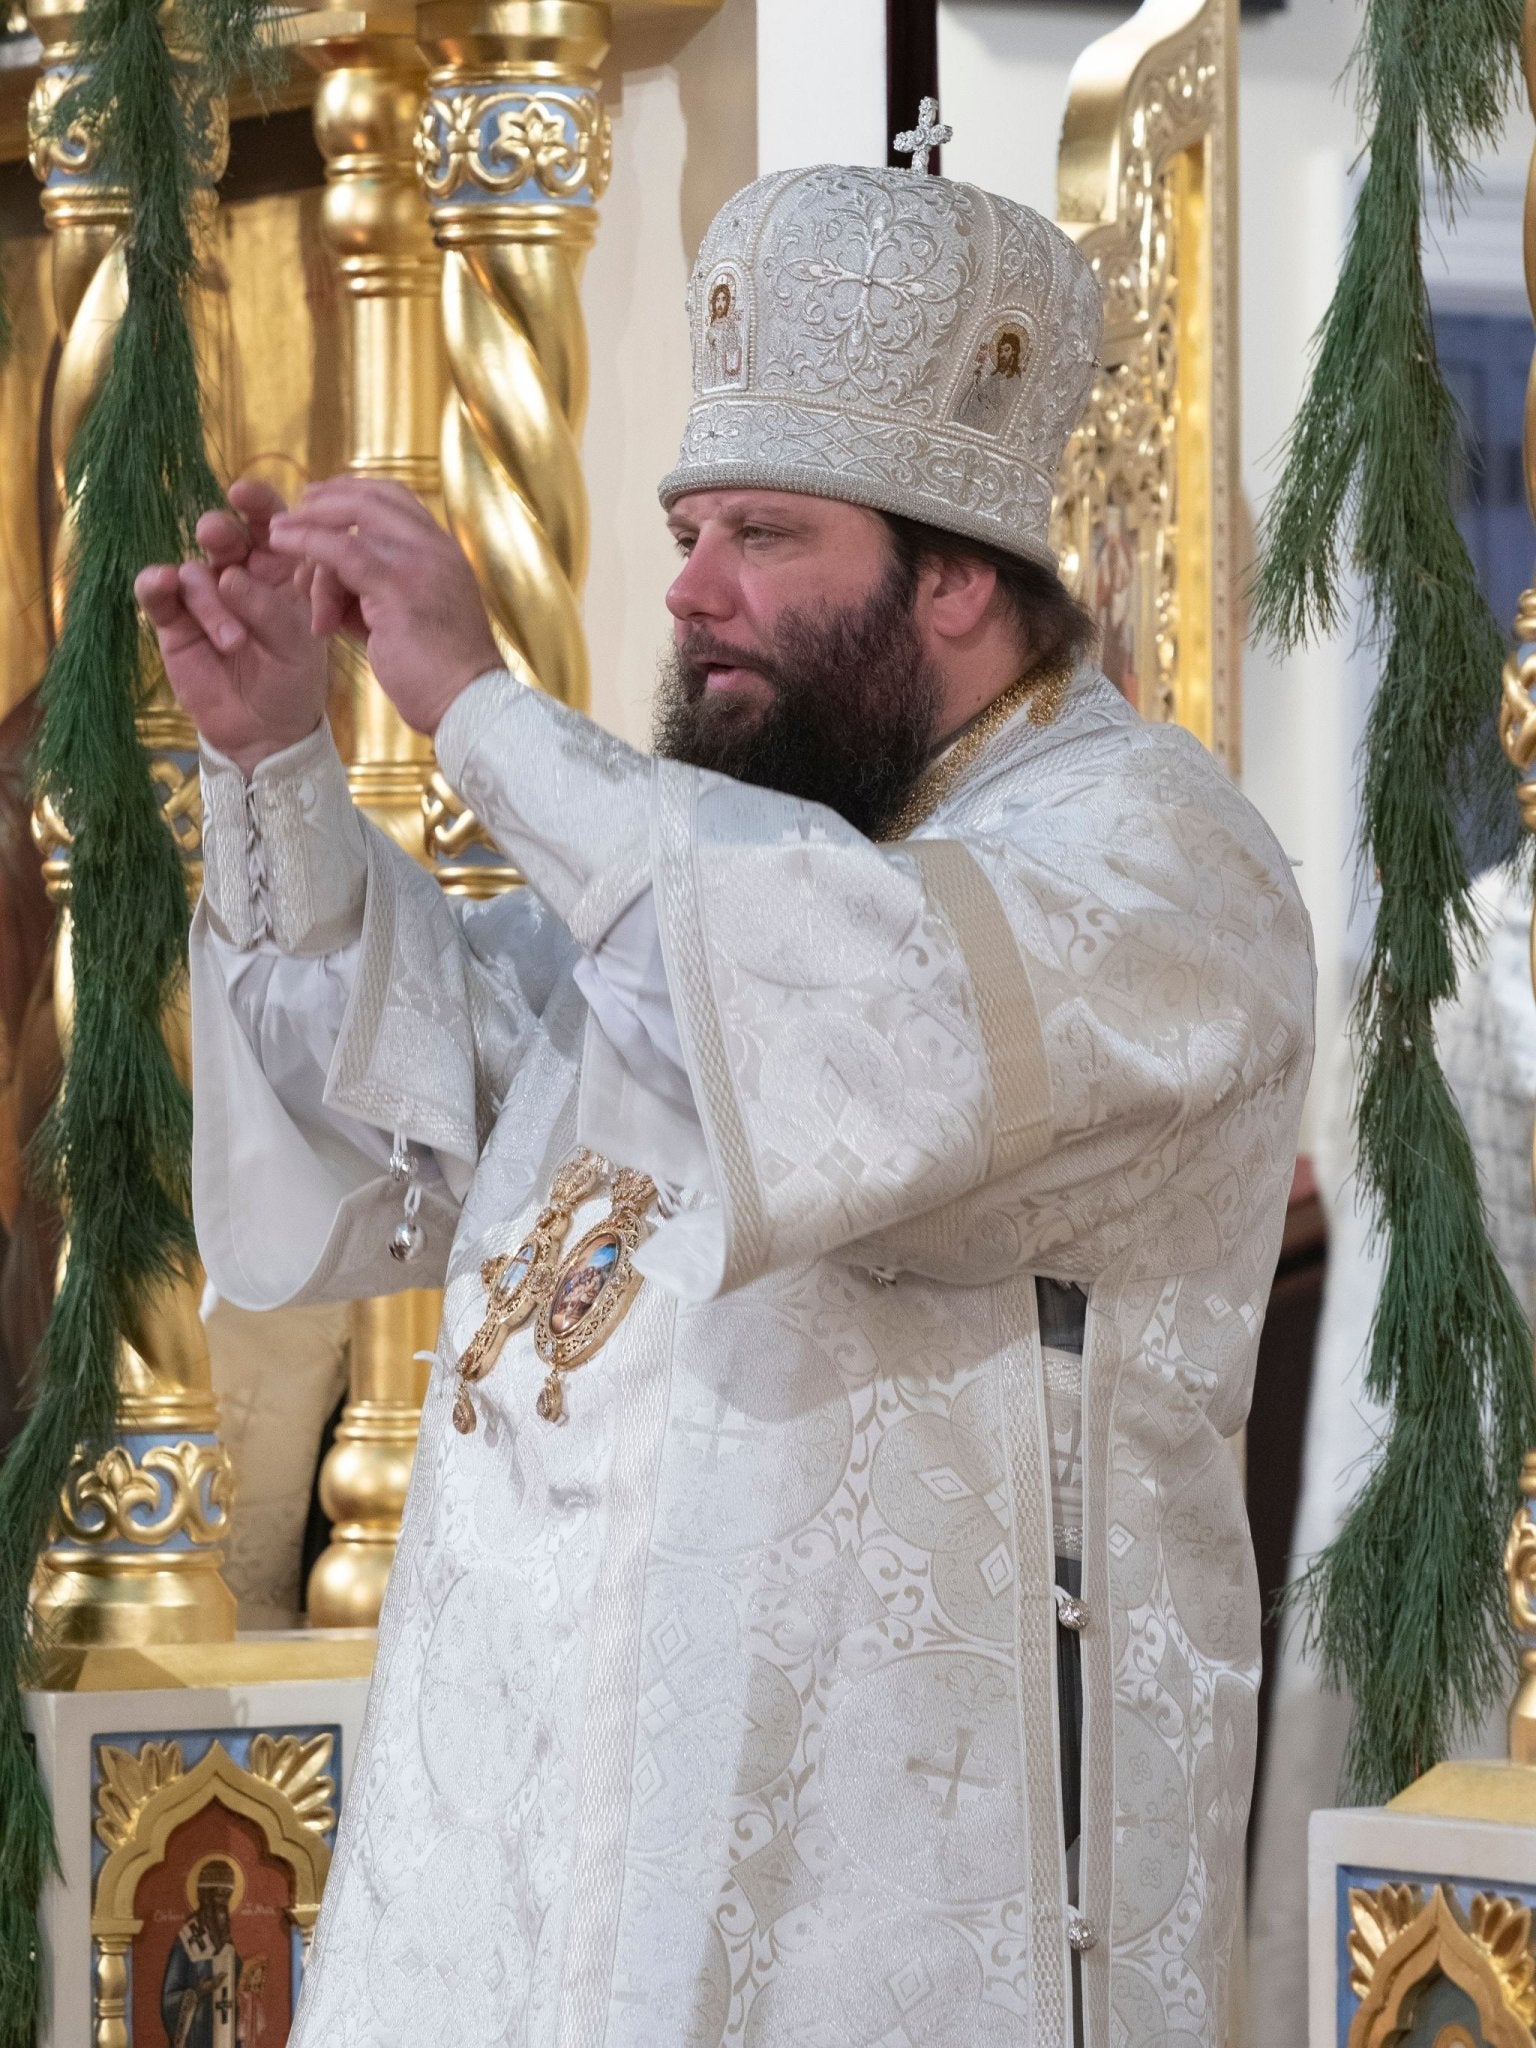 Nativity Epistle of His Eminence Nicholas, Metropolitan of Eastern America & New York, First Hierarch of the Russian Orthodox Church Outside of Russia